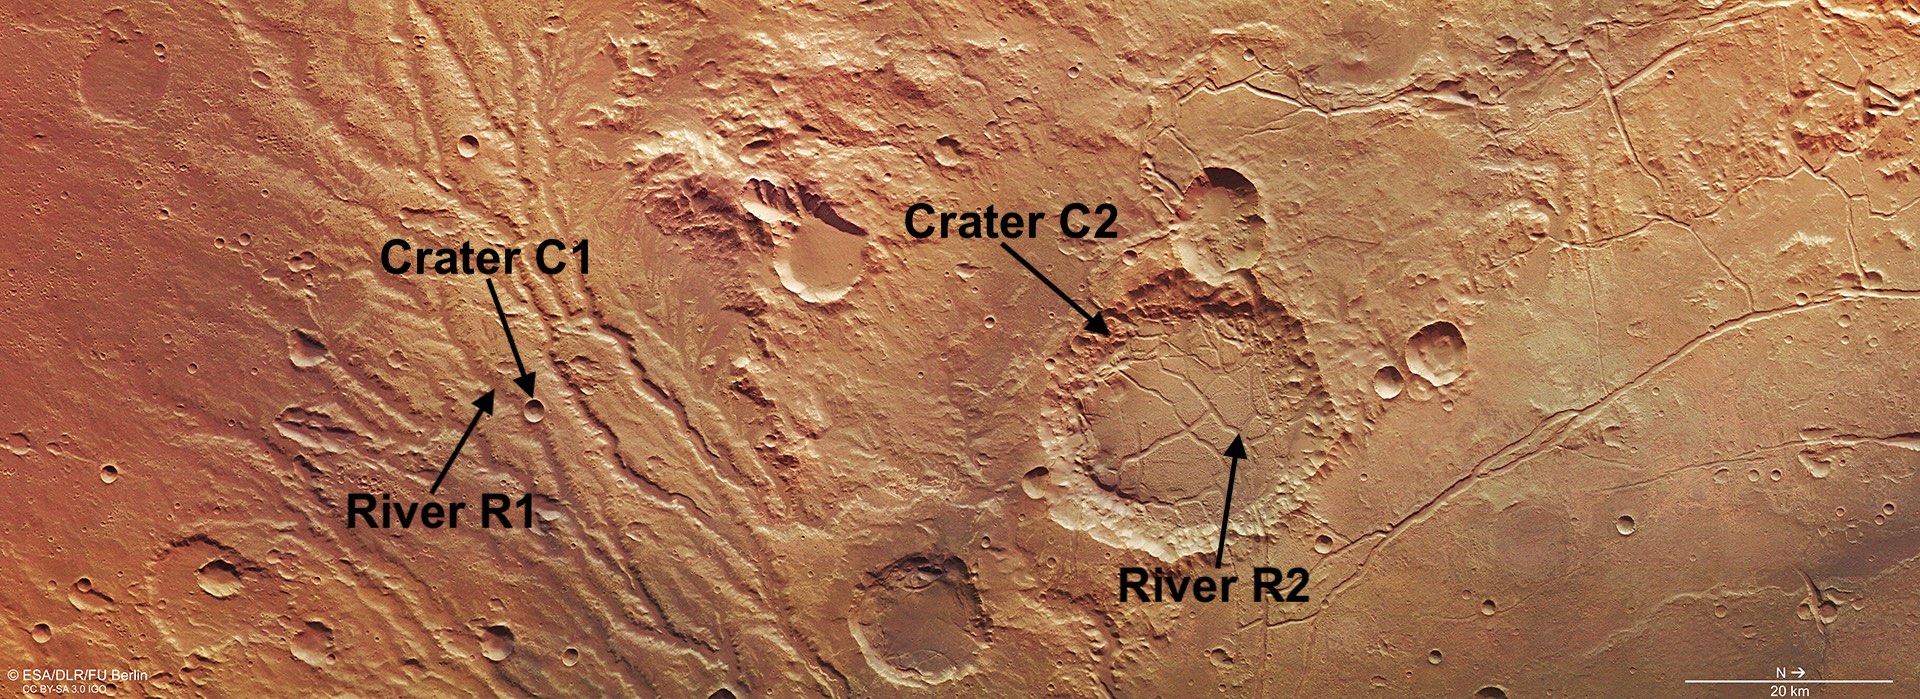 Martian imagery for craters and rivers for Exercise 3.9c